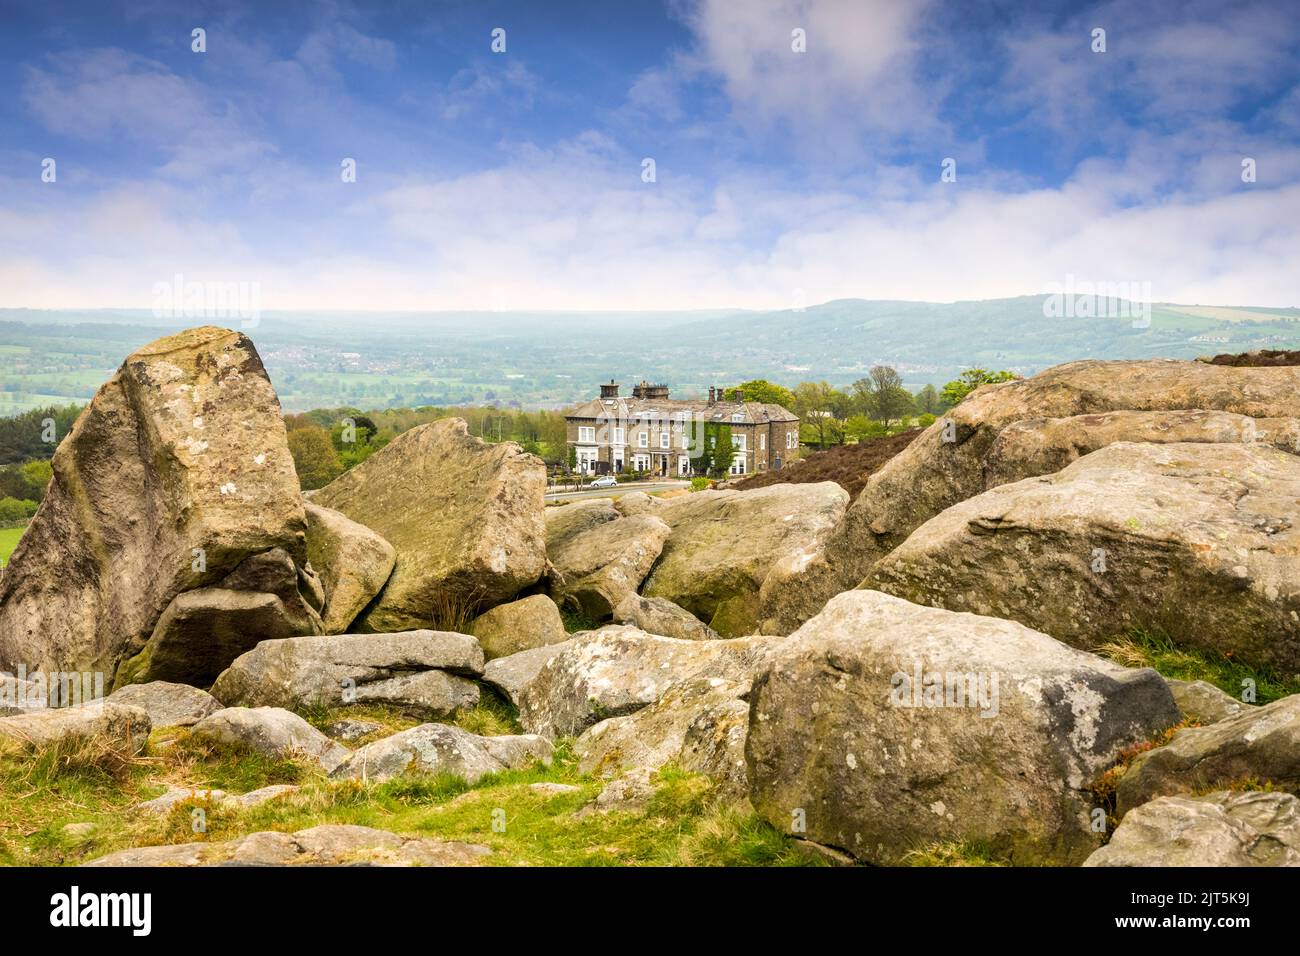 6 May 2022: Ilkley Moor, West Yorkshire, UK - The Cow and Calf, roadside pub and hotel on Ilkley Moor near the rock formations with the same name. See Stock Photo